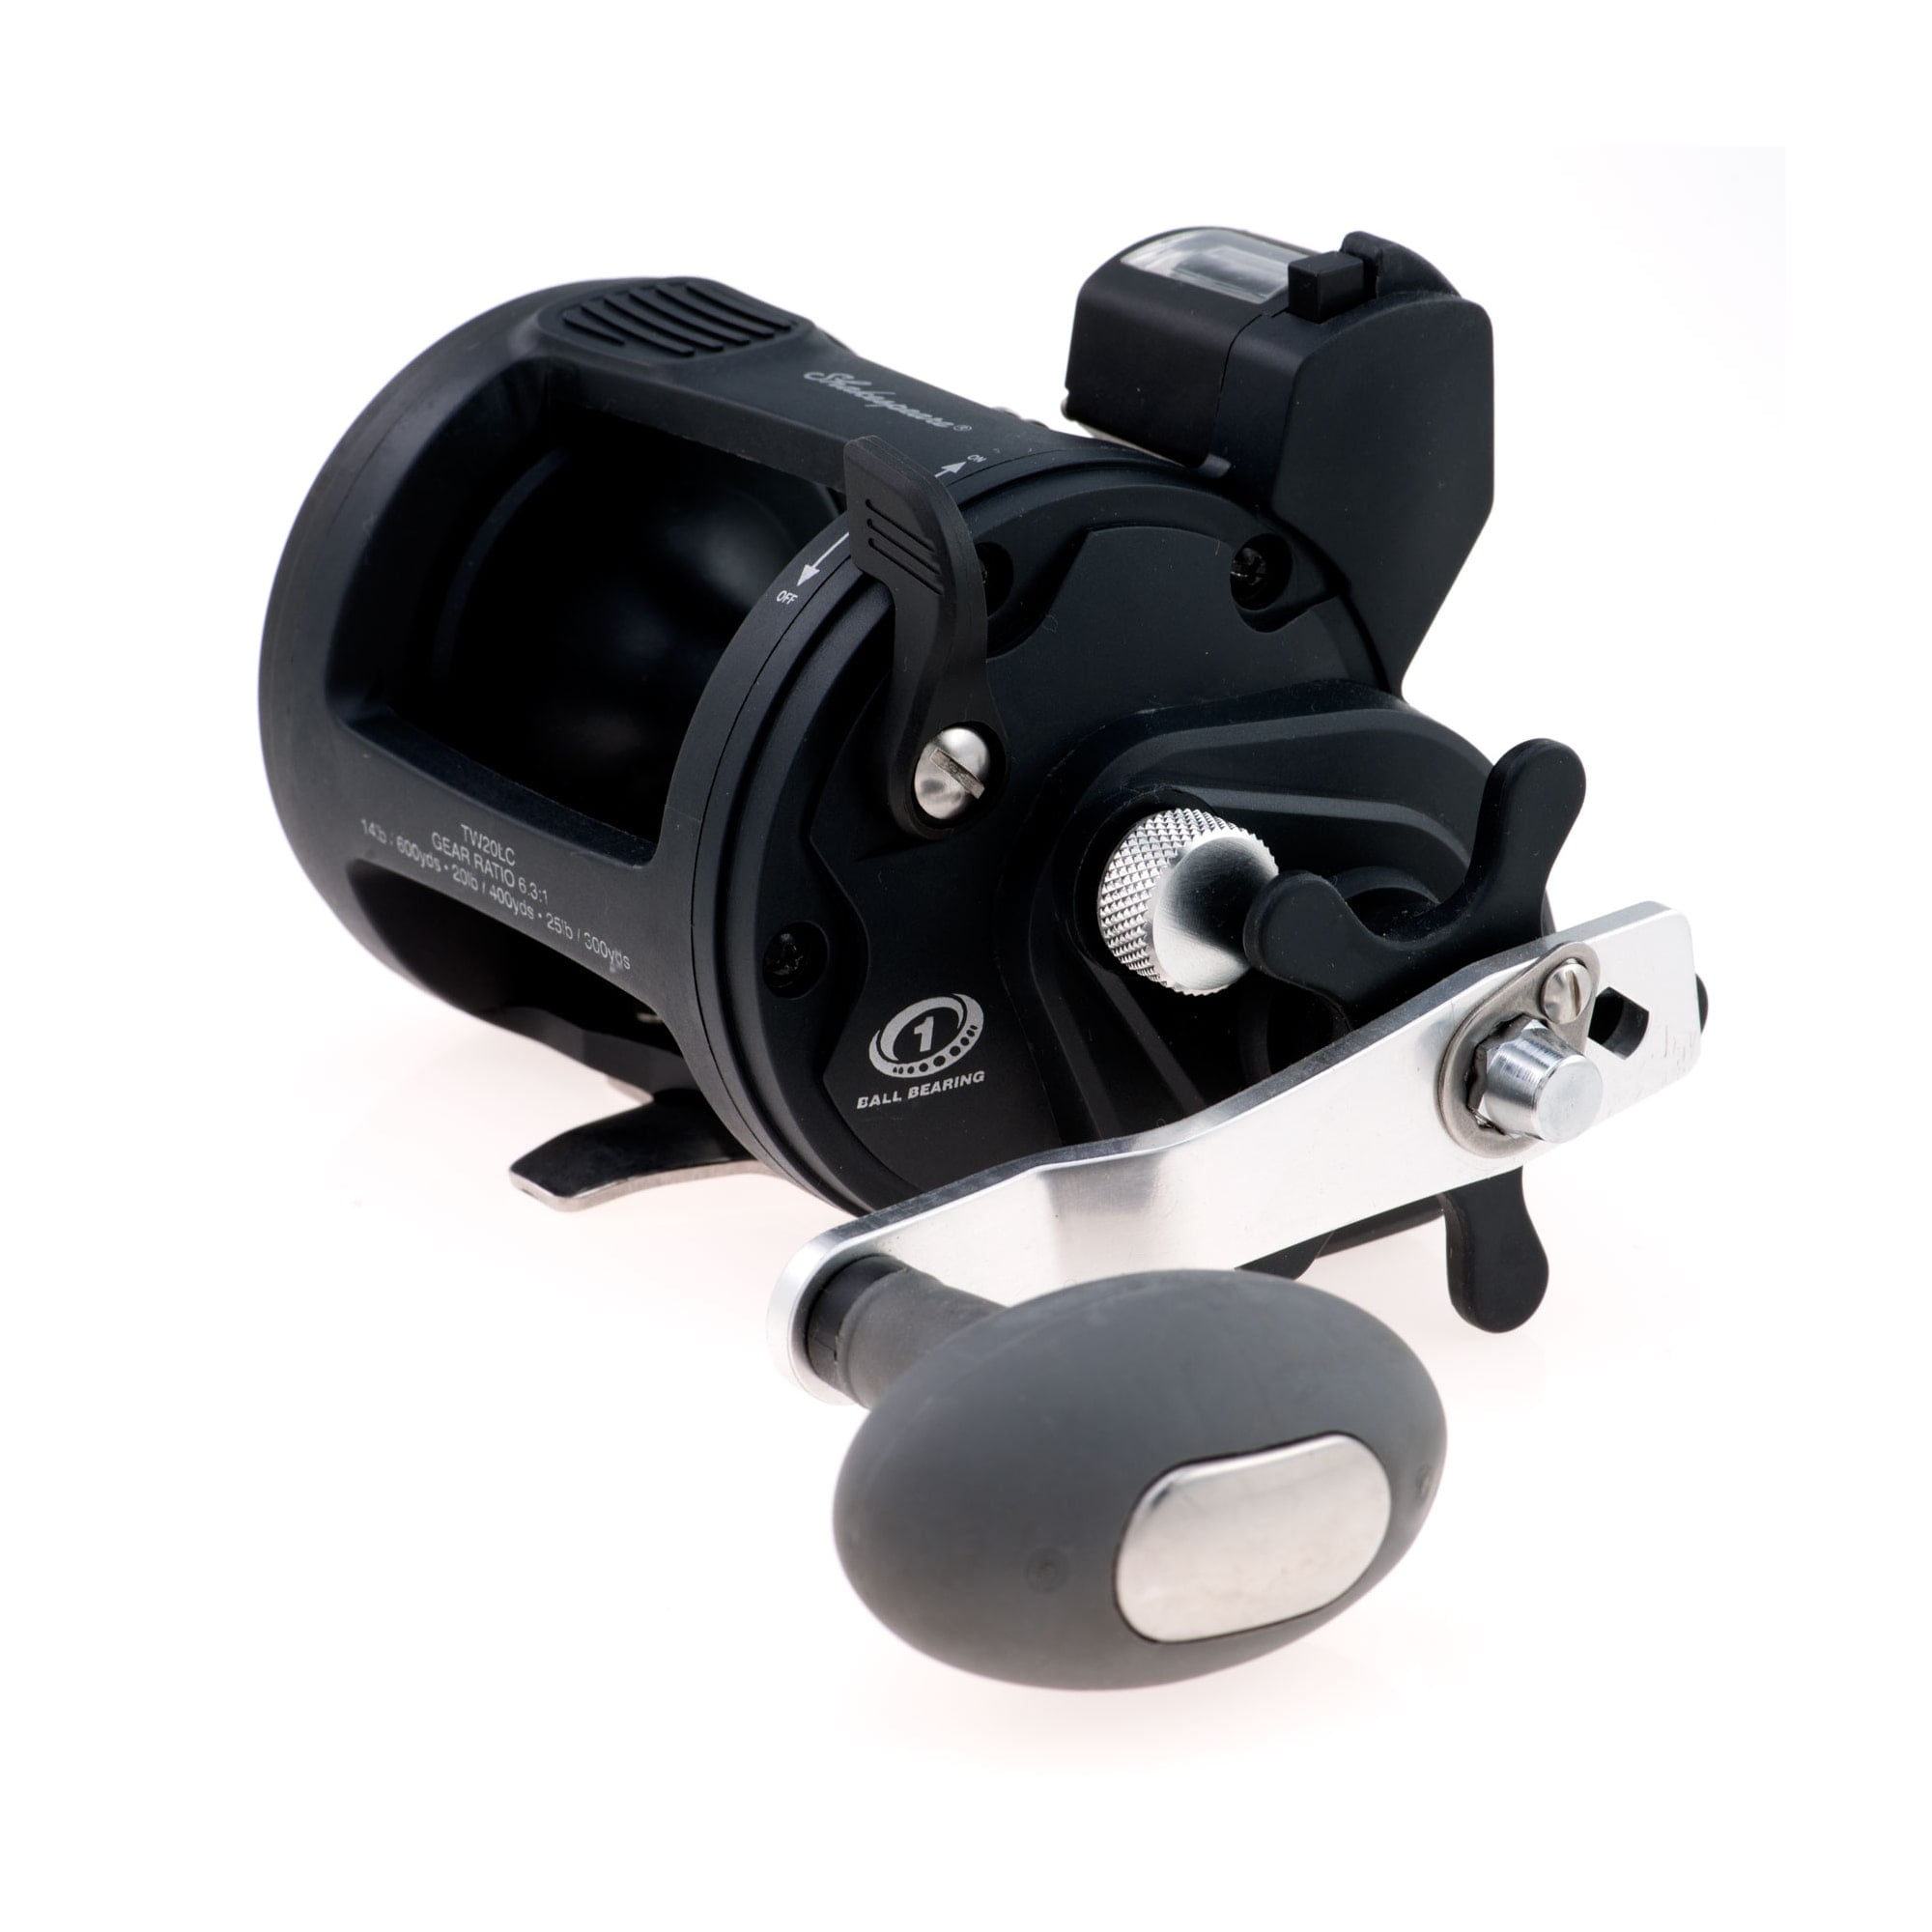 Shakespeare ATS Trolling Fishing Reel with Line Counter, Right Hand, 200